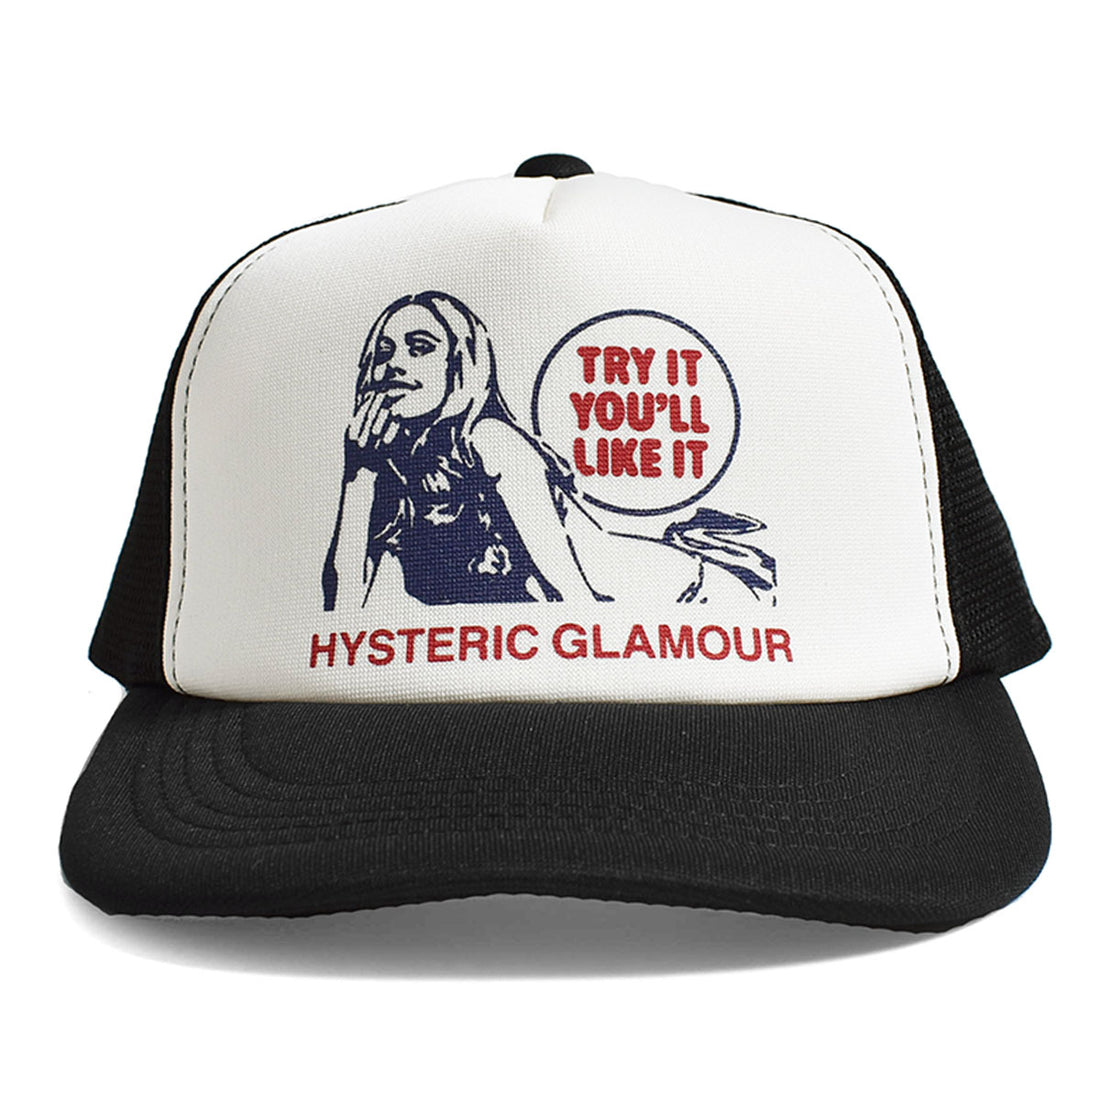 [HYSTERIC GLAMOUR]TRY IT YOU'LL LIKE IT メッシュキャップ/BLACK(02231QH04)